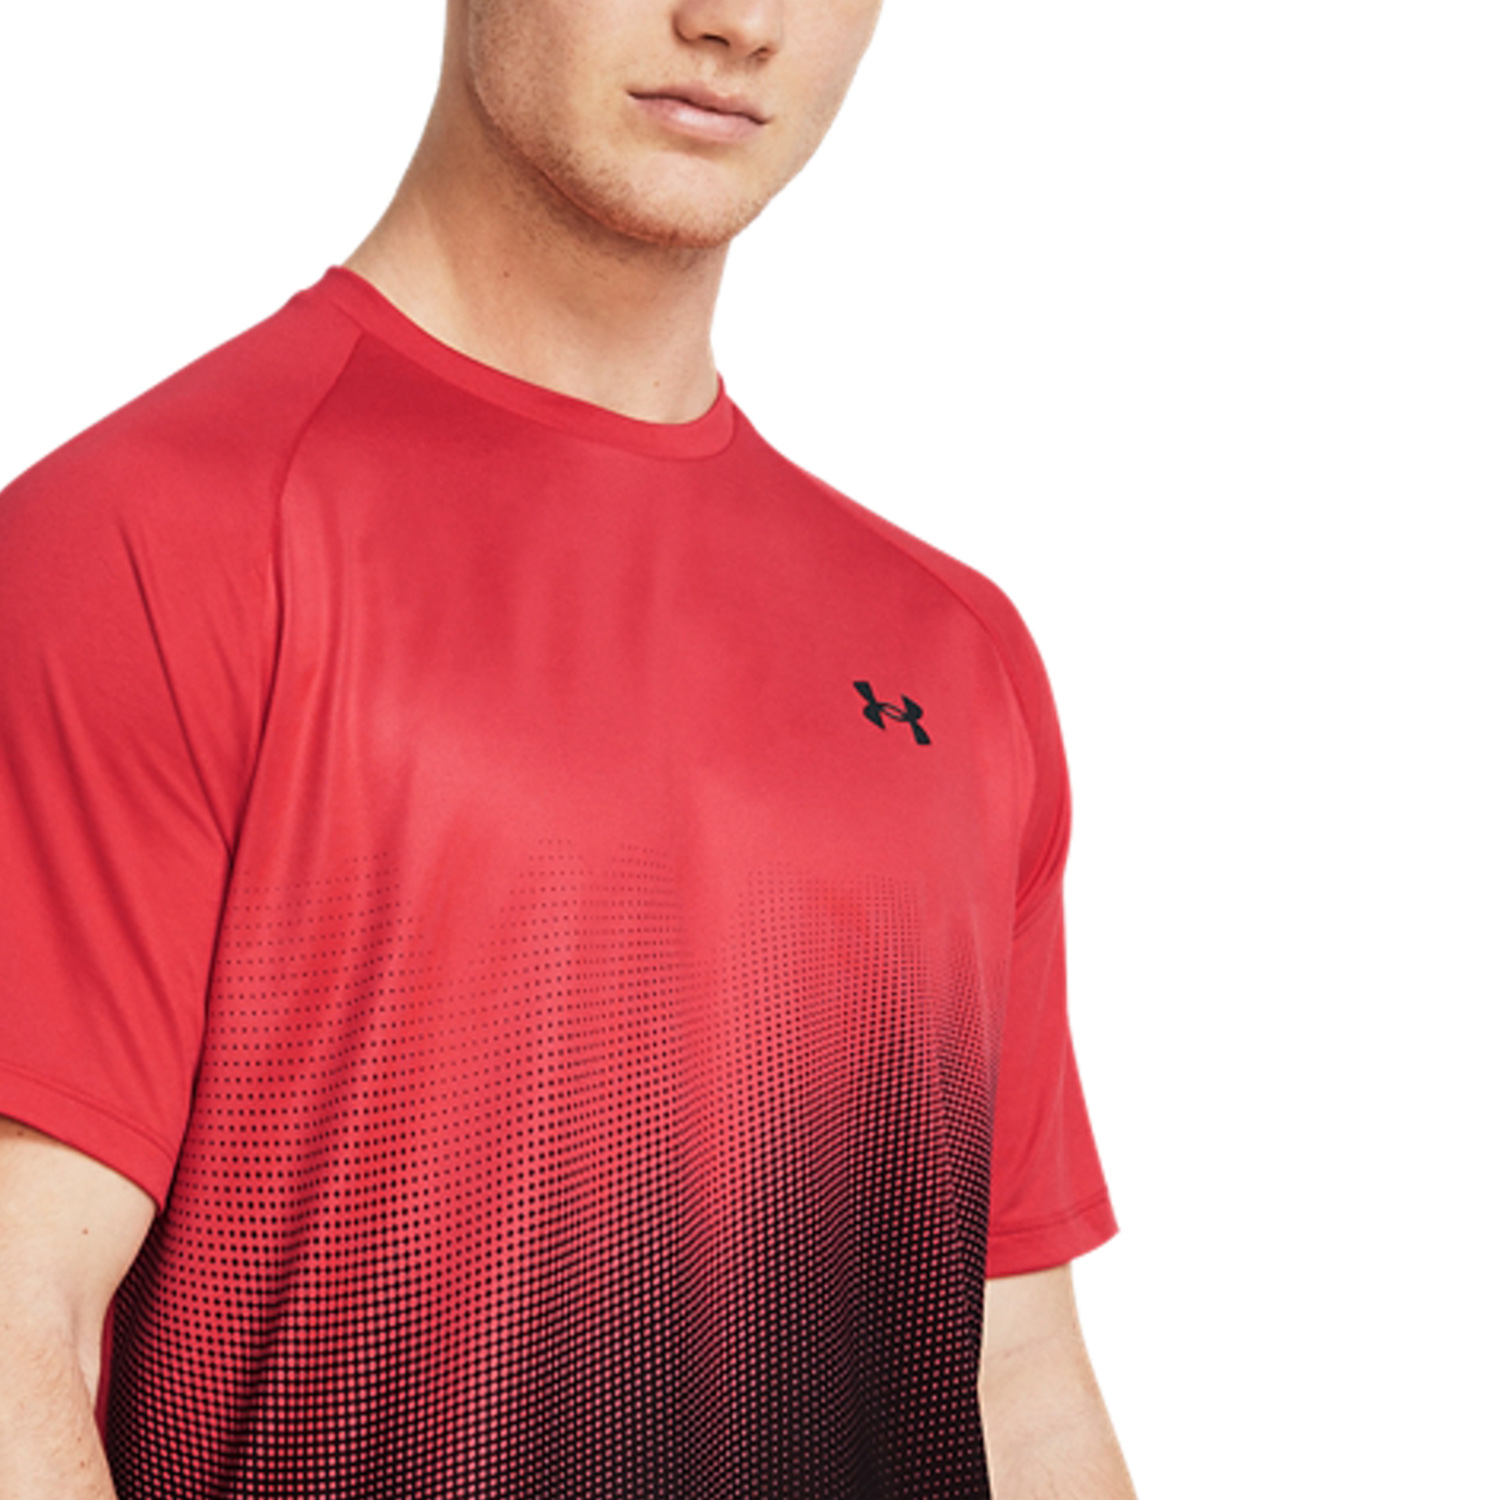 Under Armour Tech Fade T-Shirt - Red Solstice/Black